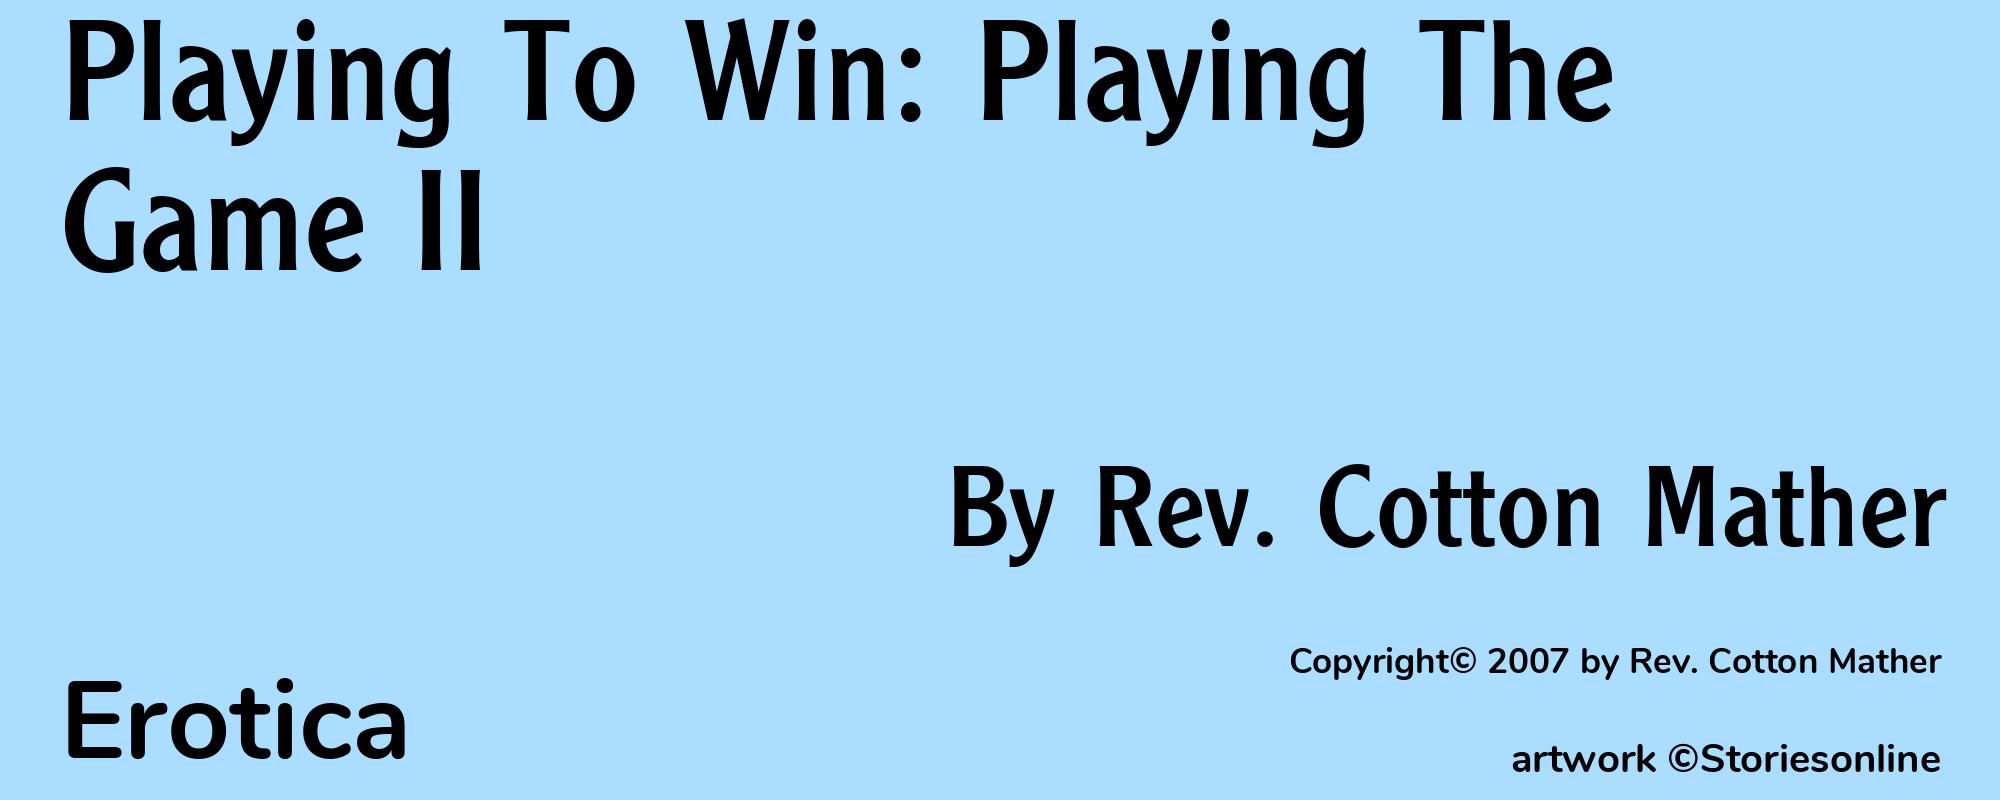 Playing To Win: Playing The Game II - Cover